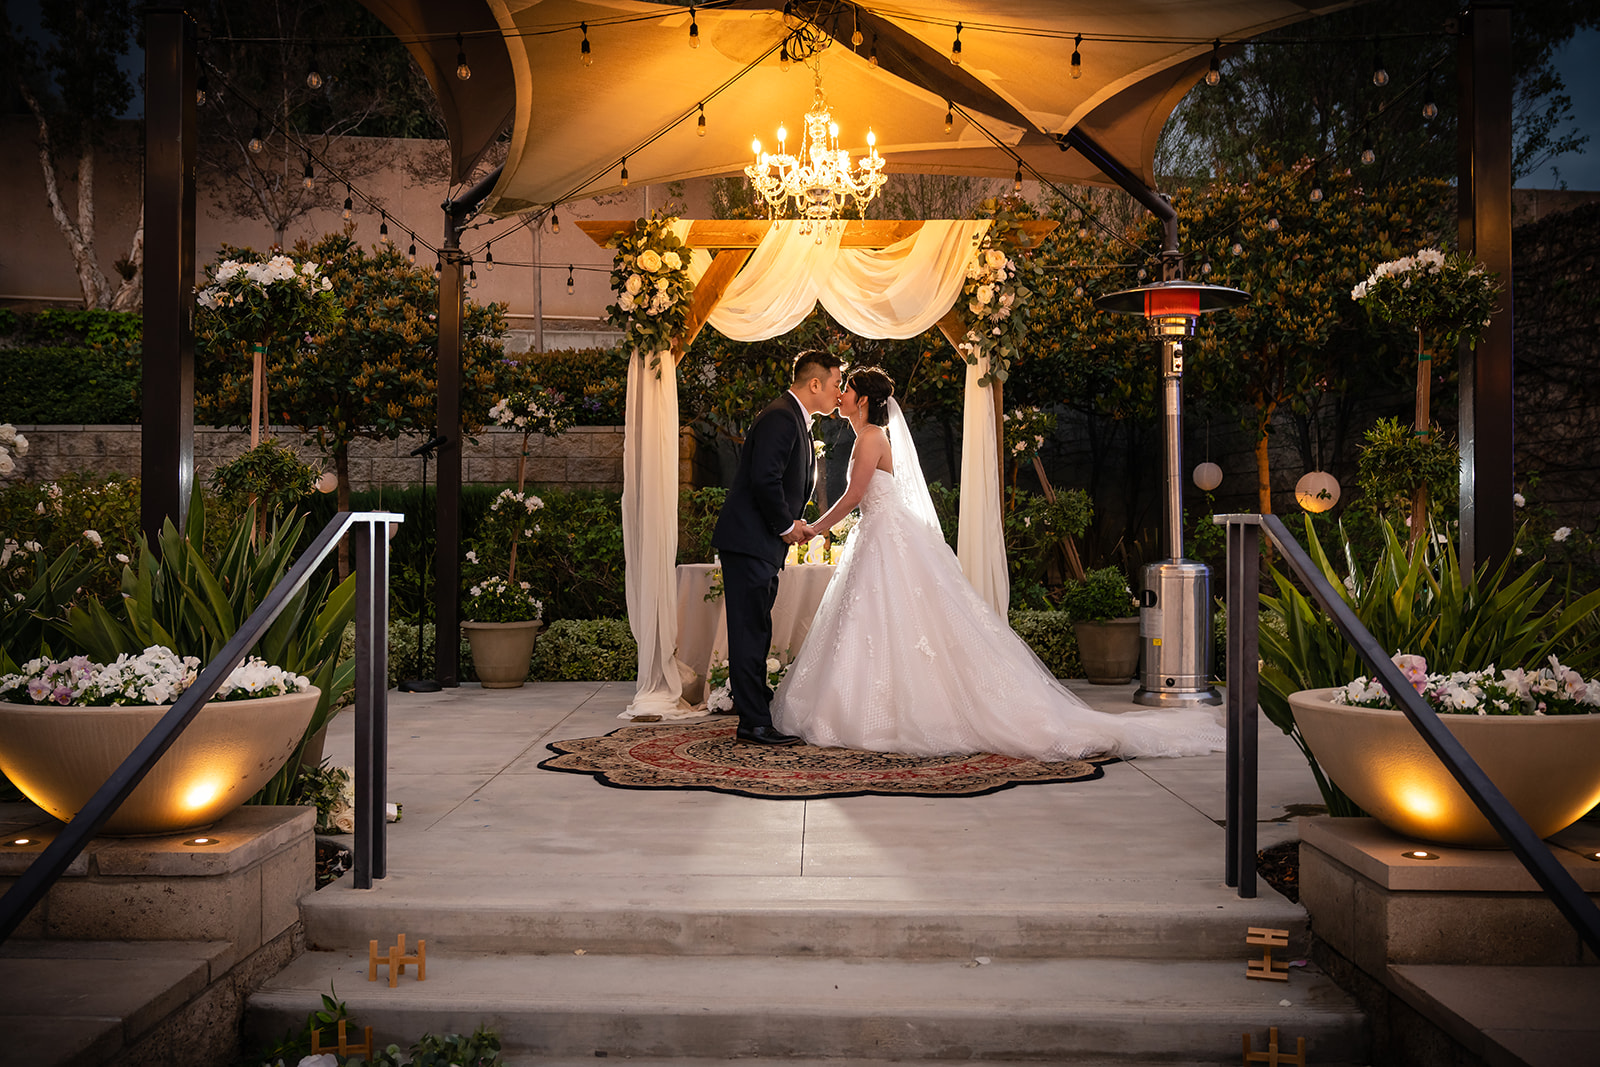 Photographer Thomas Kim captures a beautiful outdoor wedding ceremony in Los Angeles, featuring a bride and groom kissing.